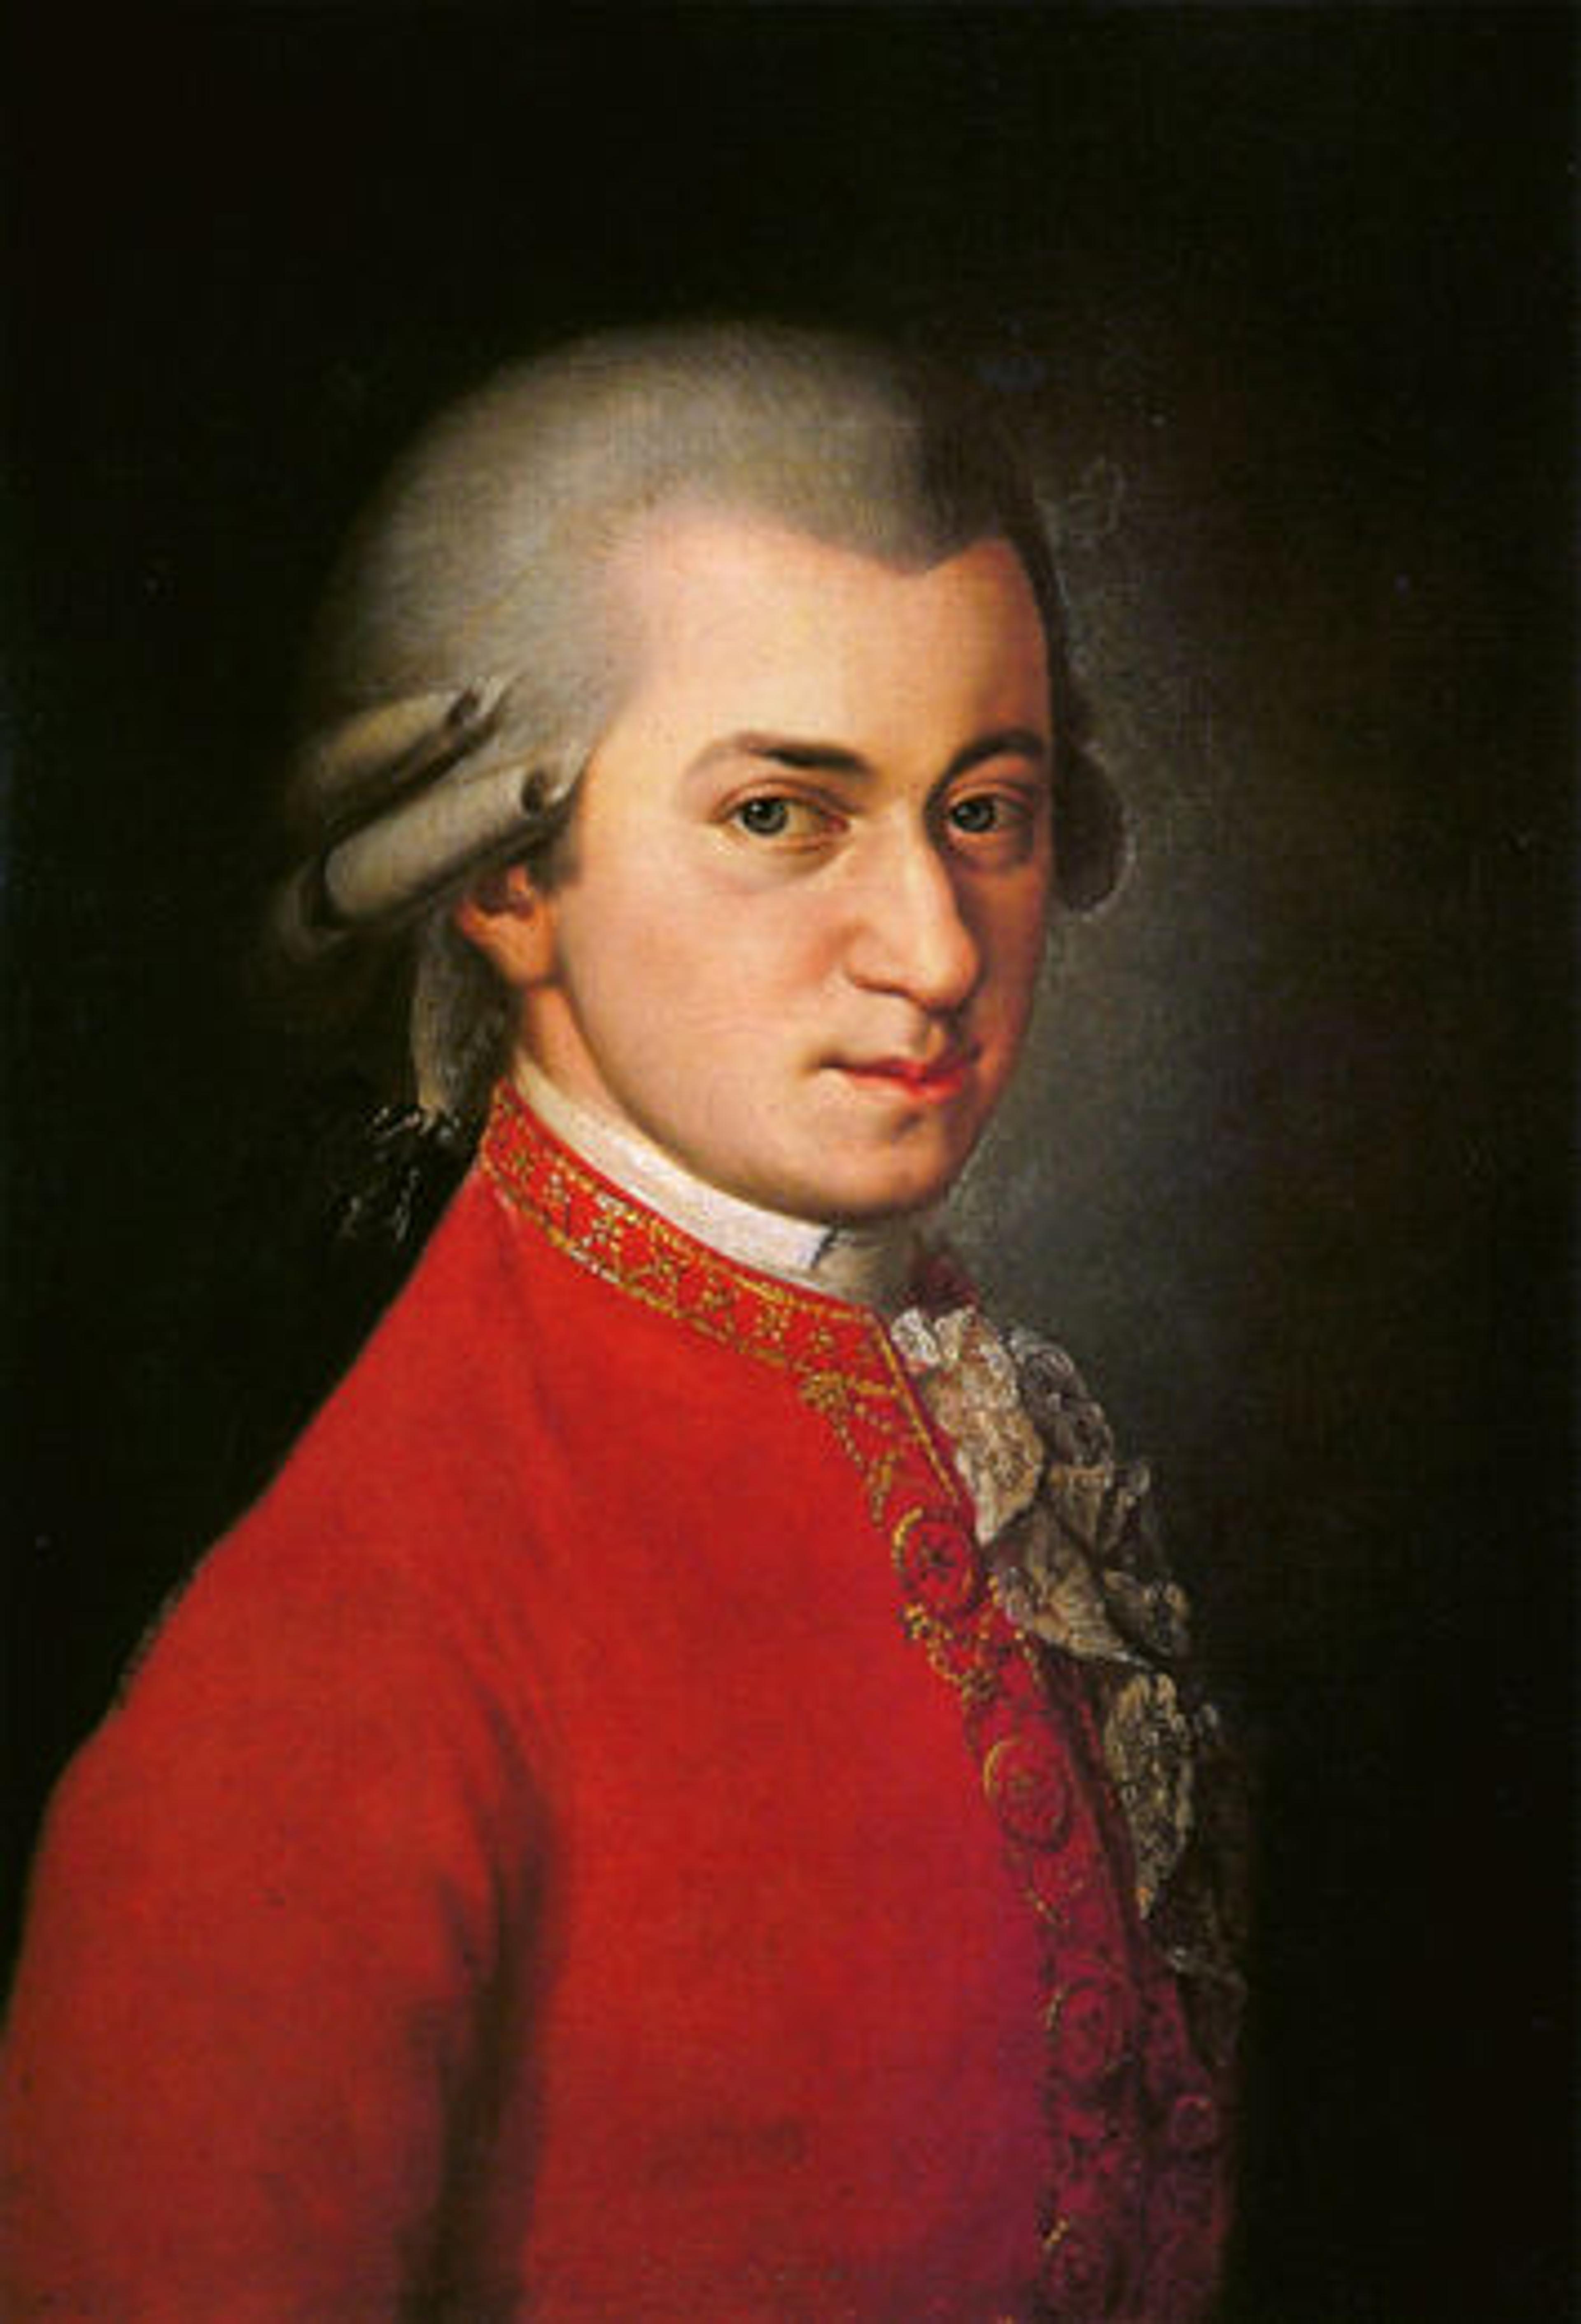 Portrait of Wolfgang Amadeus Mozart in a red jacket and powdered wig